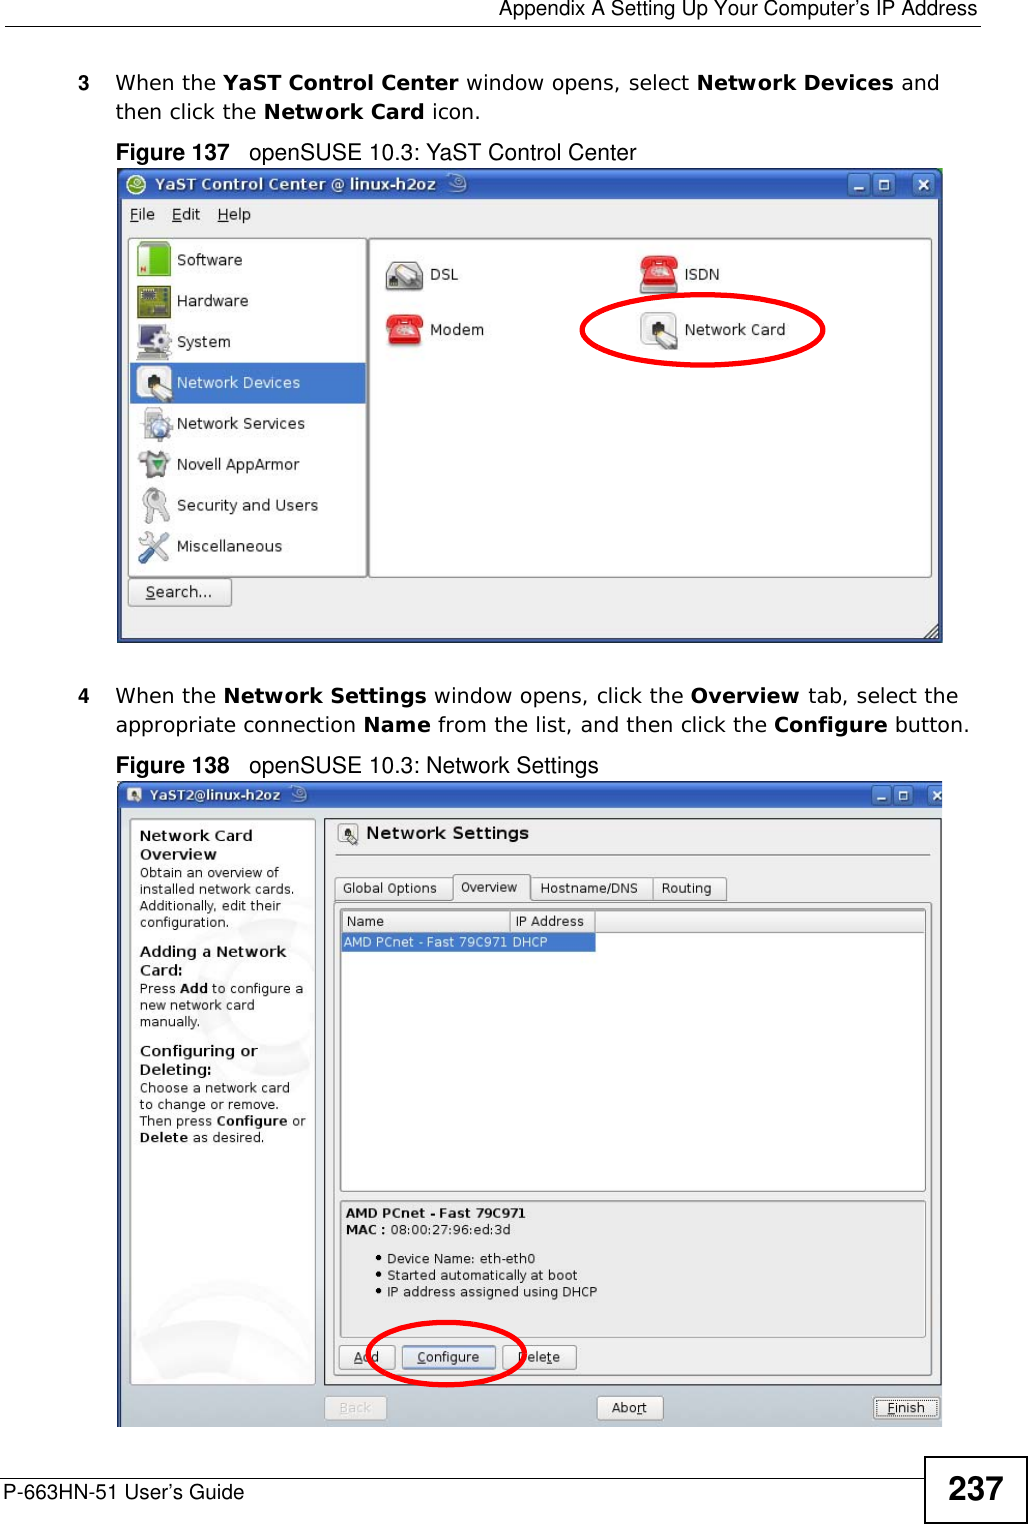  Appendix A Setting Up Your Computer’s IP AddressP-663HN-51 User’s Guide 2373When the YaST Control Center window opens, select Network Devices and then click the Network Card icon.Figure 137   openSUSE 10.3: YaST Control Center4When the Network Settings window opens, click the Overview tab, select the appropriate connection Name from the list, and then click the Configure button. Figure 138   openSUSE 10.3: Network Settings